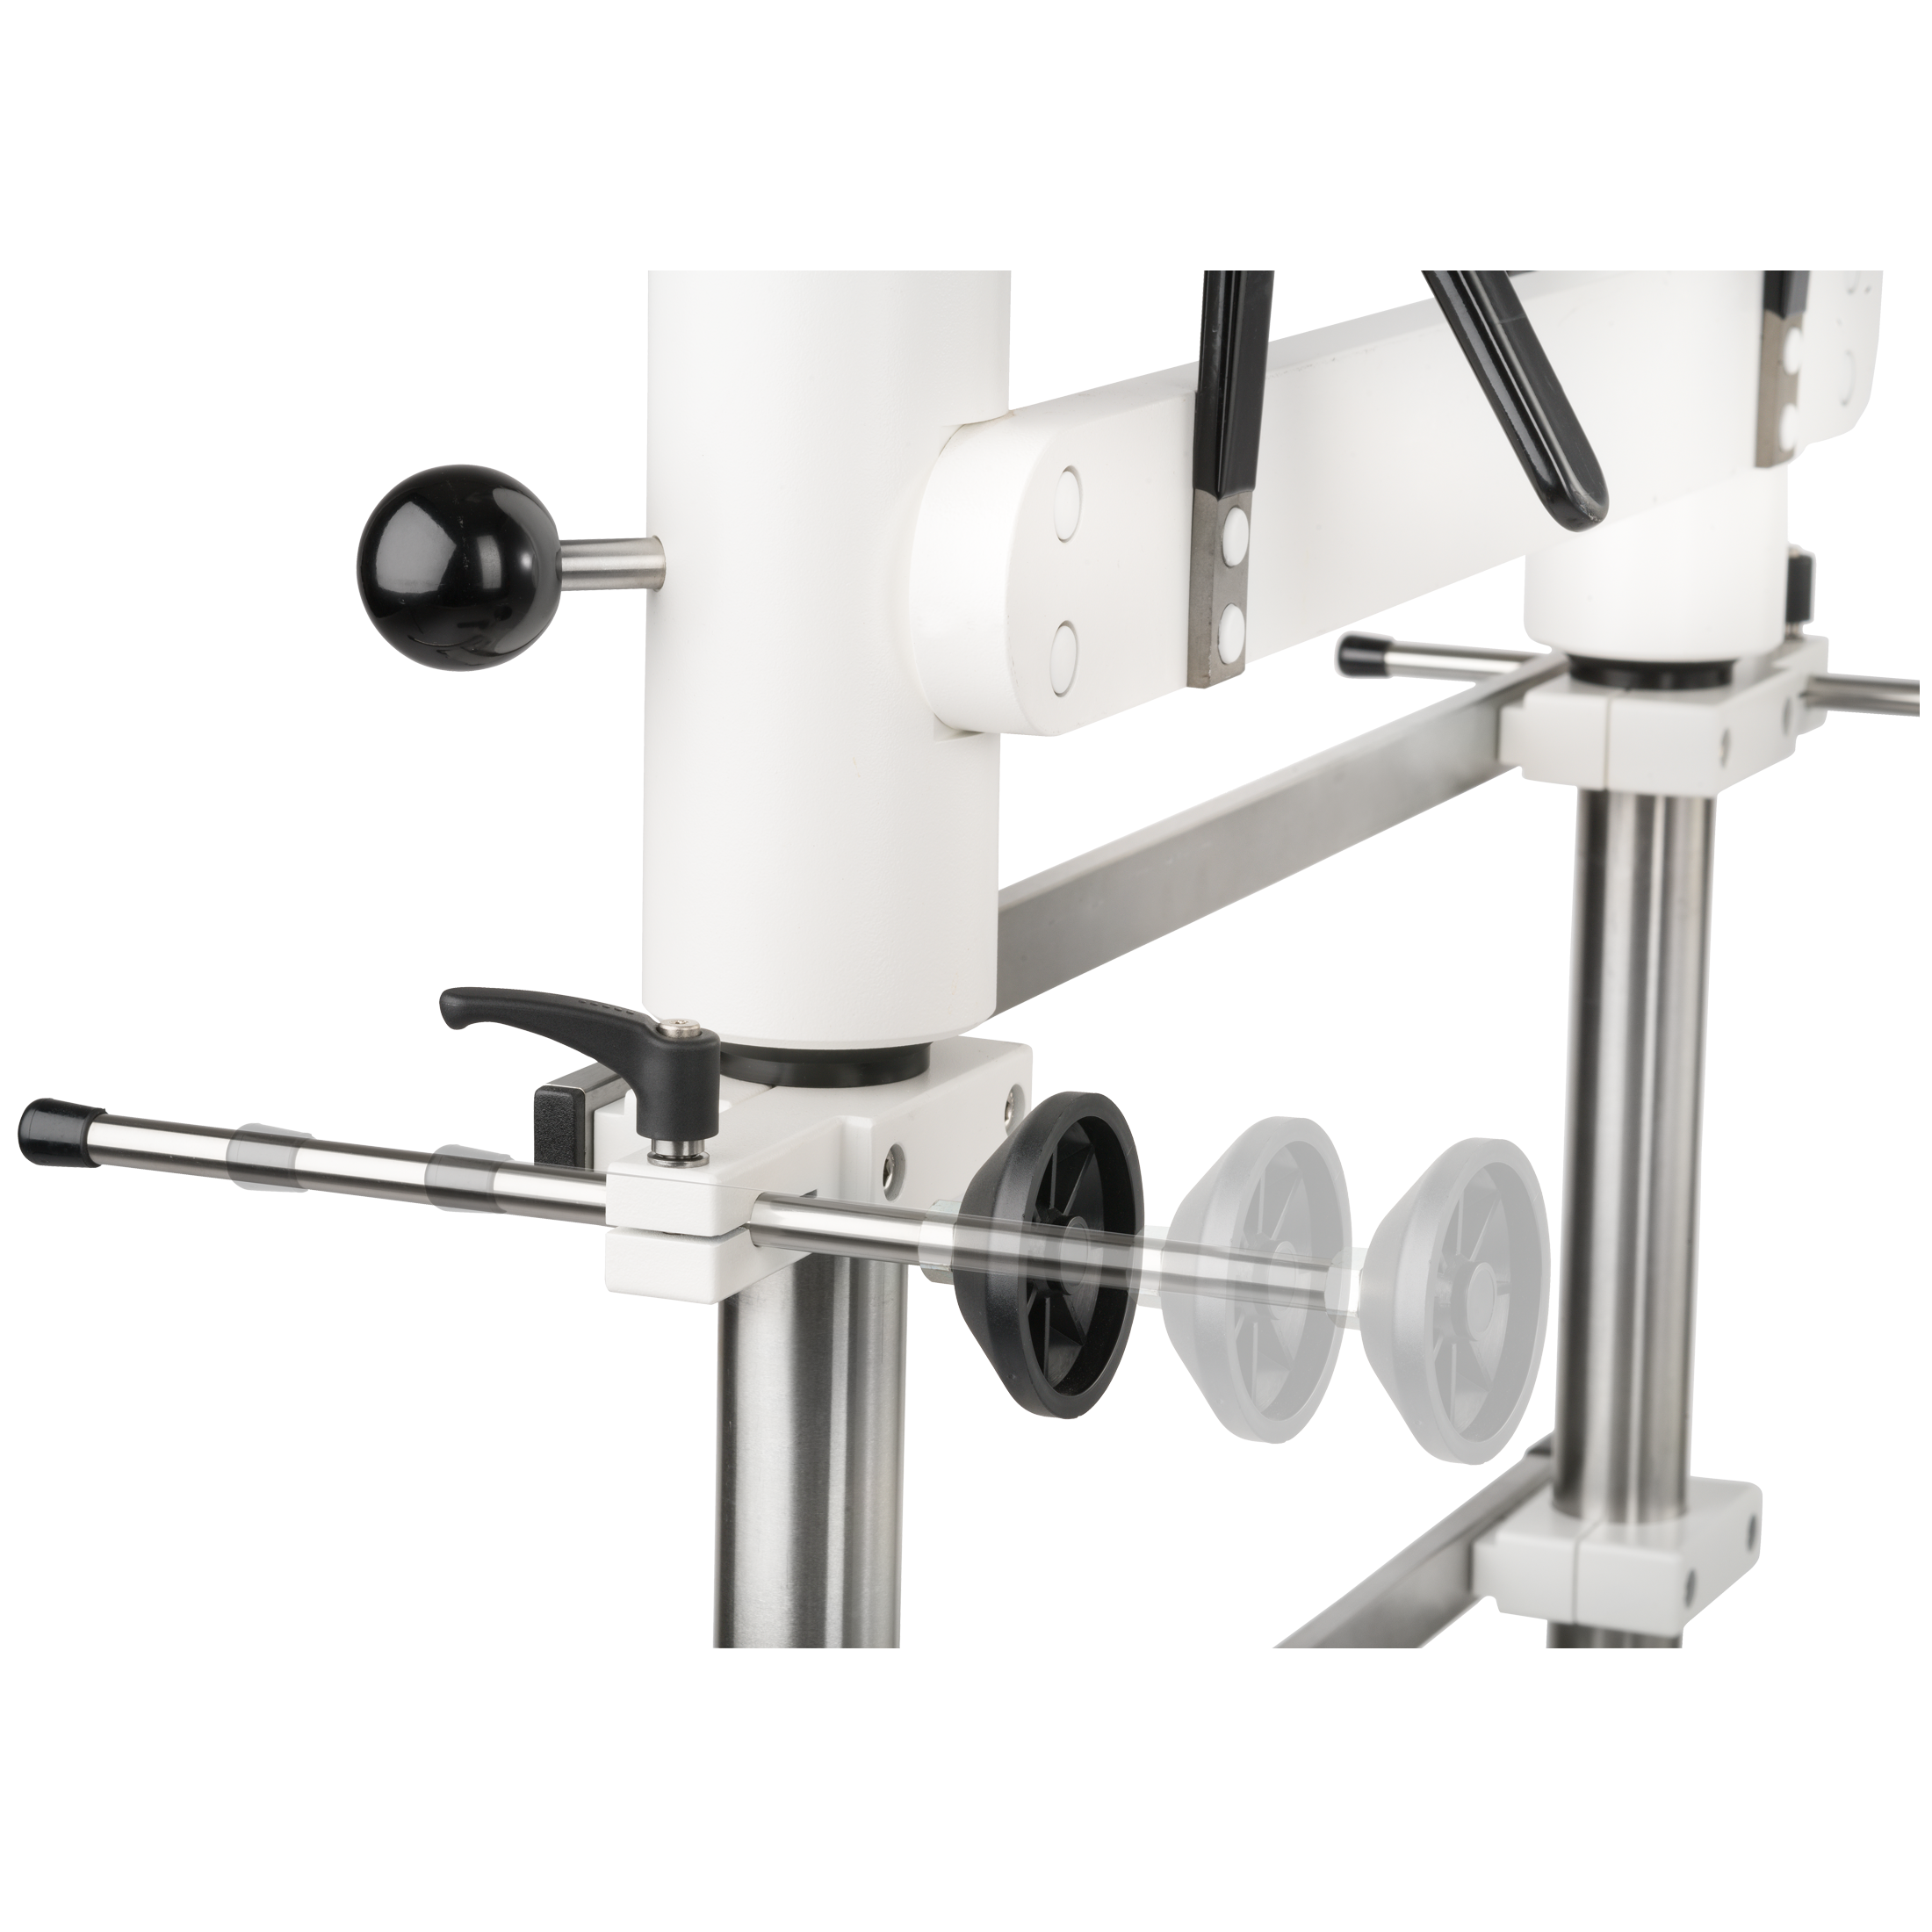 Stabilizer rail with 2 adjustable supports